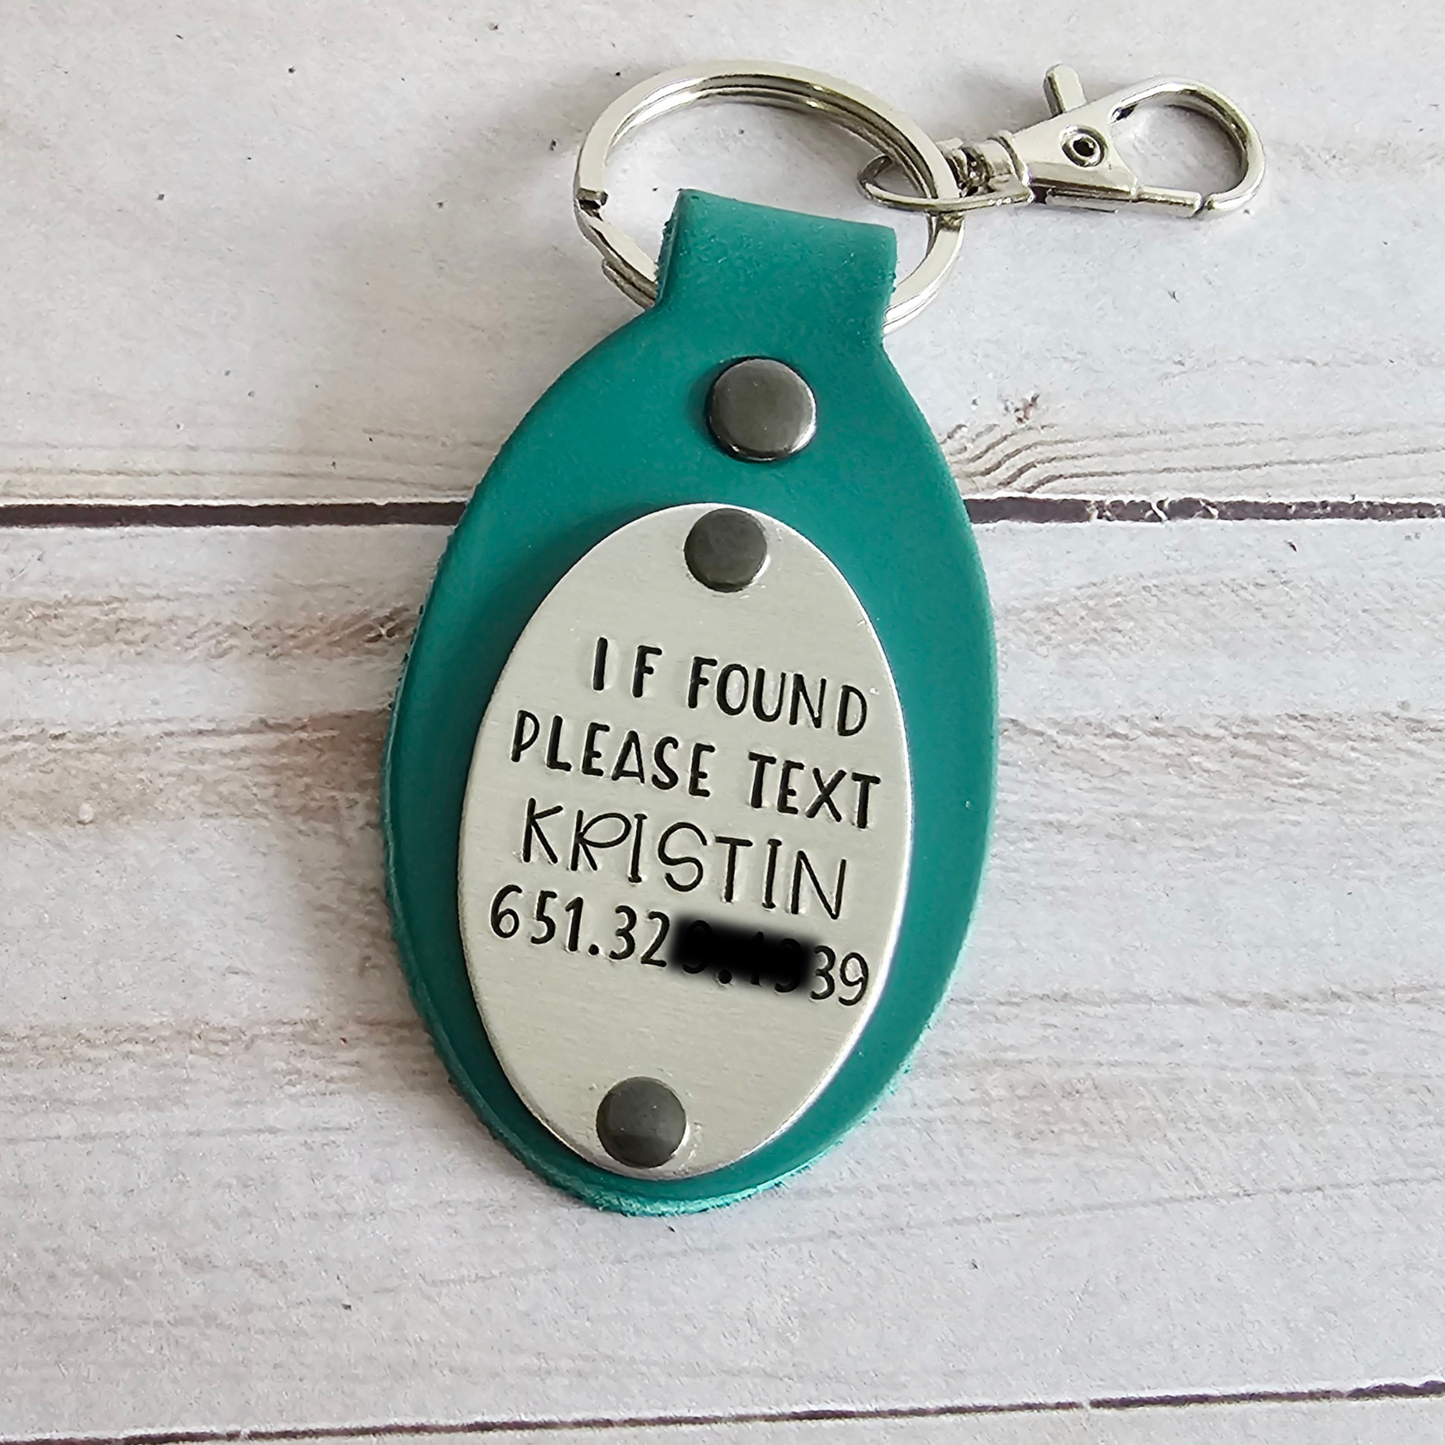 Leather Keychain Identification Tag, If Found Please Text, ID Tag for Backpack, Purse, Luggage, Laptop Bag, Diaper Bag, Sports Equipment Bag